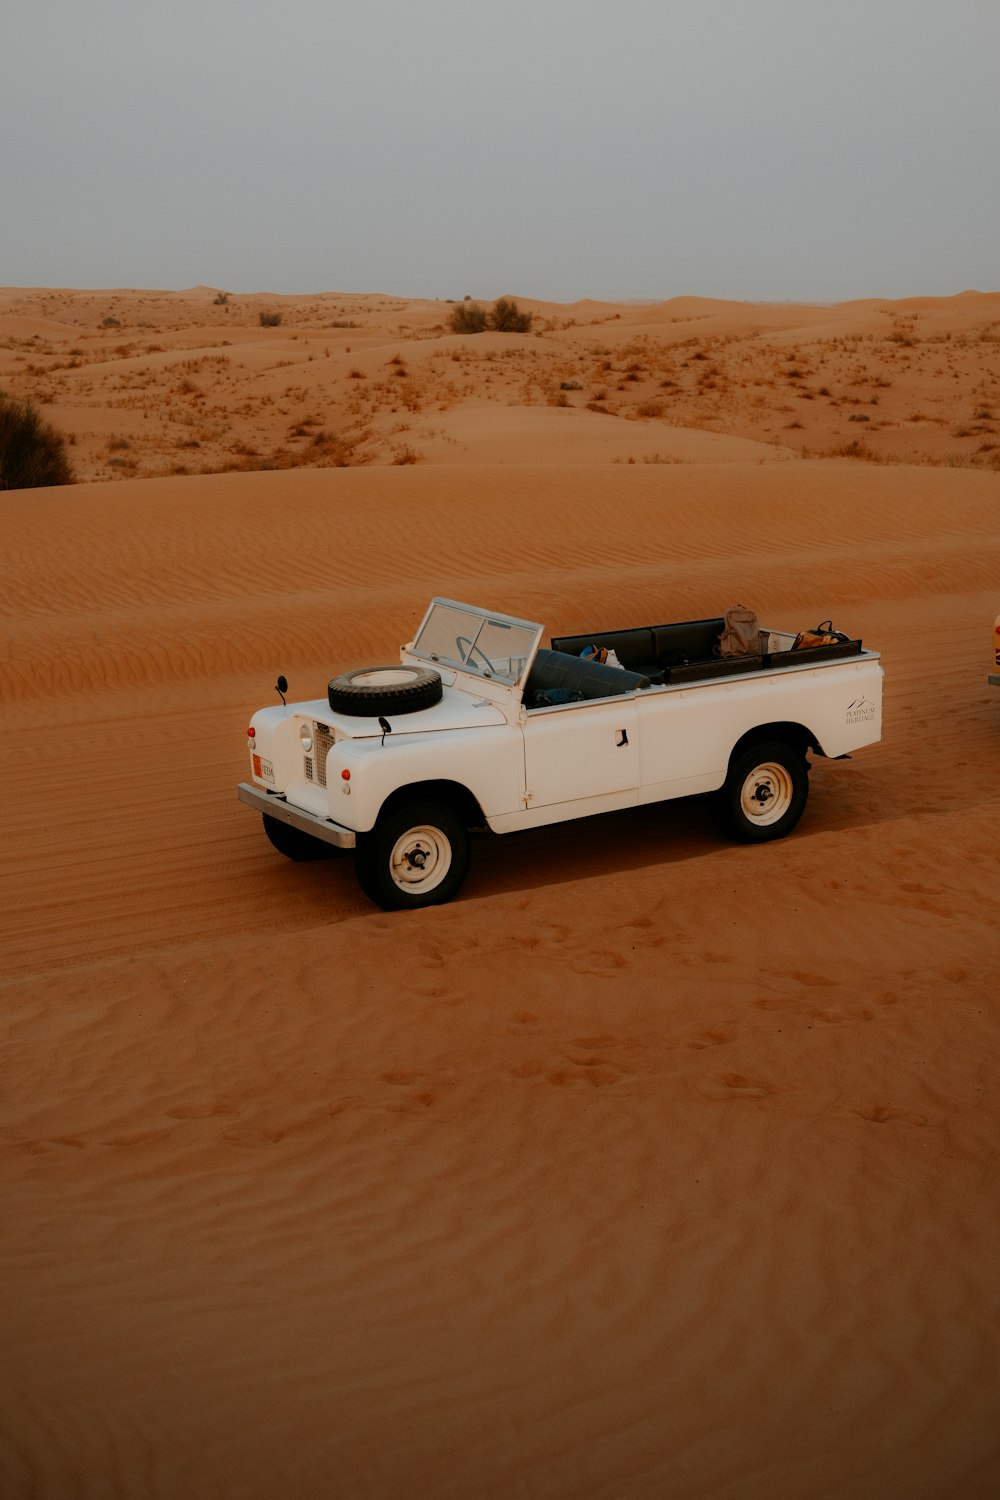 a white car in the middle of a desert